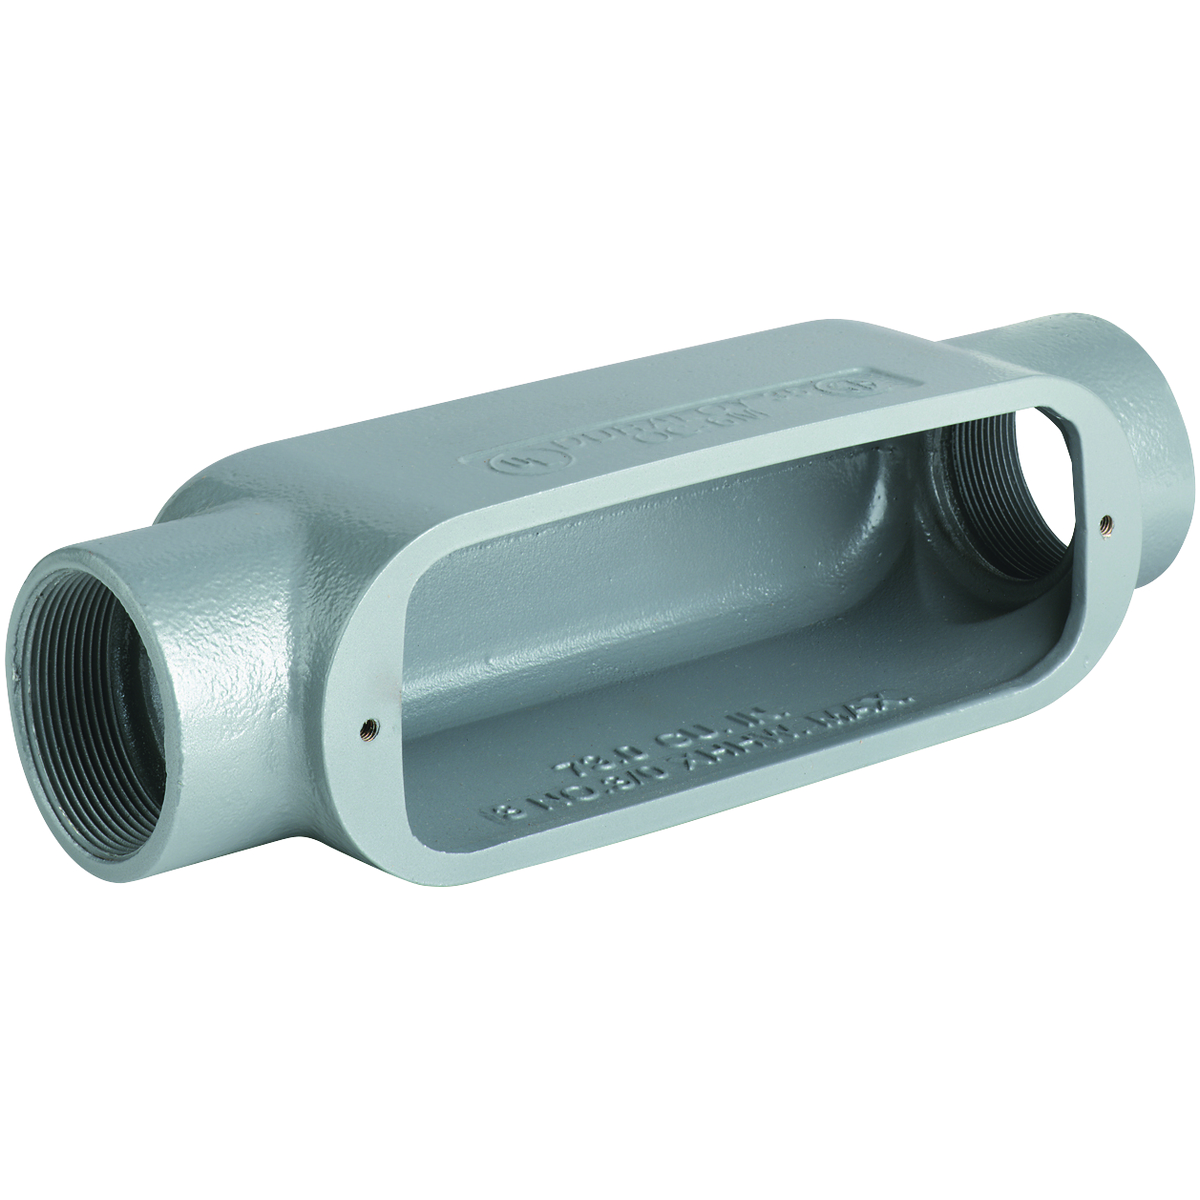 O SERIES/DURALOY 5 SERIES - ALUMINUM CONDUIT BODY - C TYPE - HUB SIZE1-1/4 INCH - VOLUME 32.0 CUBIC INCHES